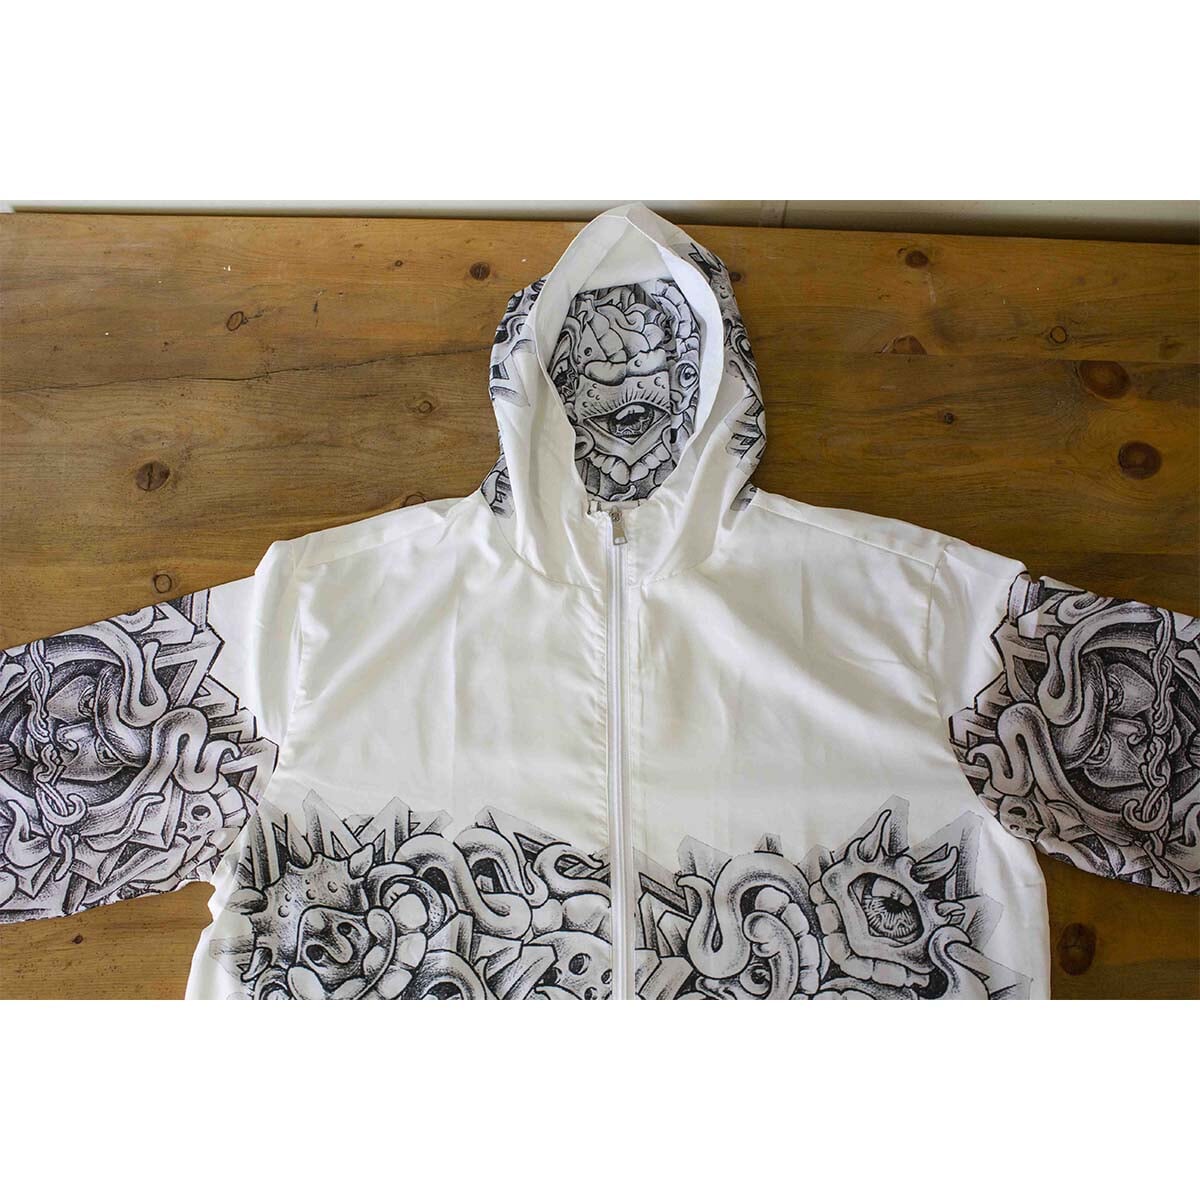 Incarcerated artist X Art for Redemption | Holiday Special Windbreaker prison art Print on Demand Art for Redemption 